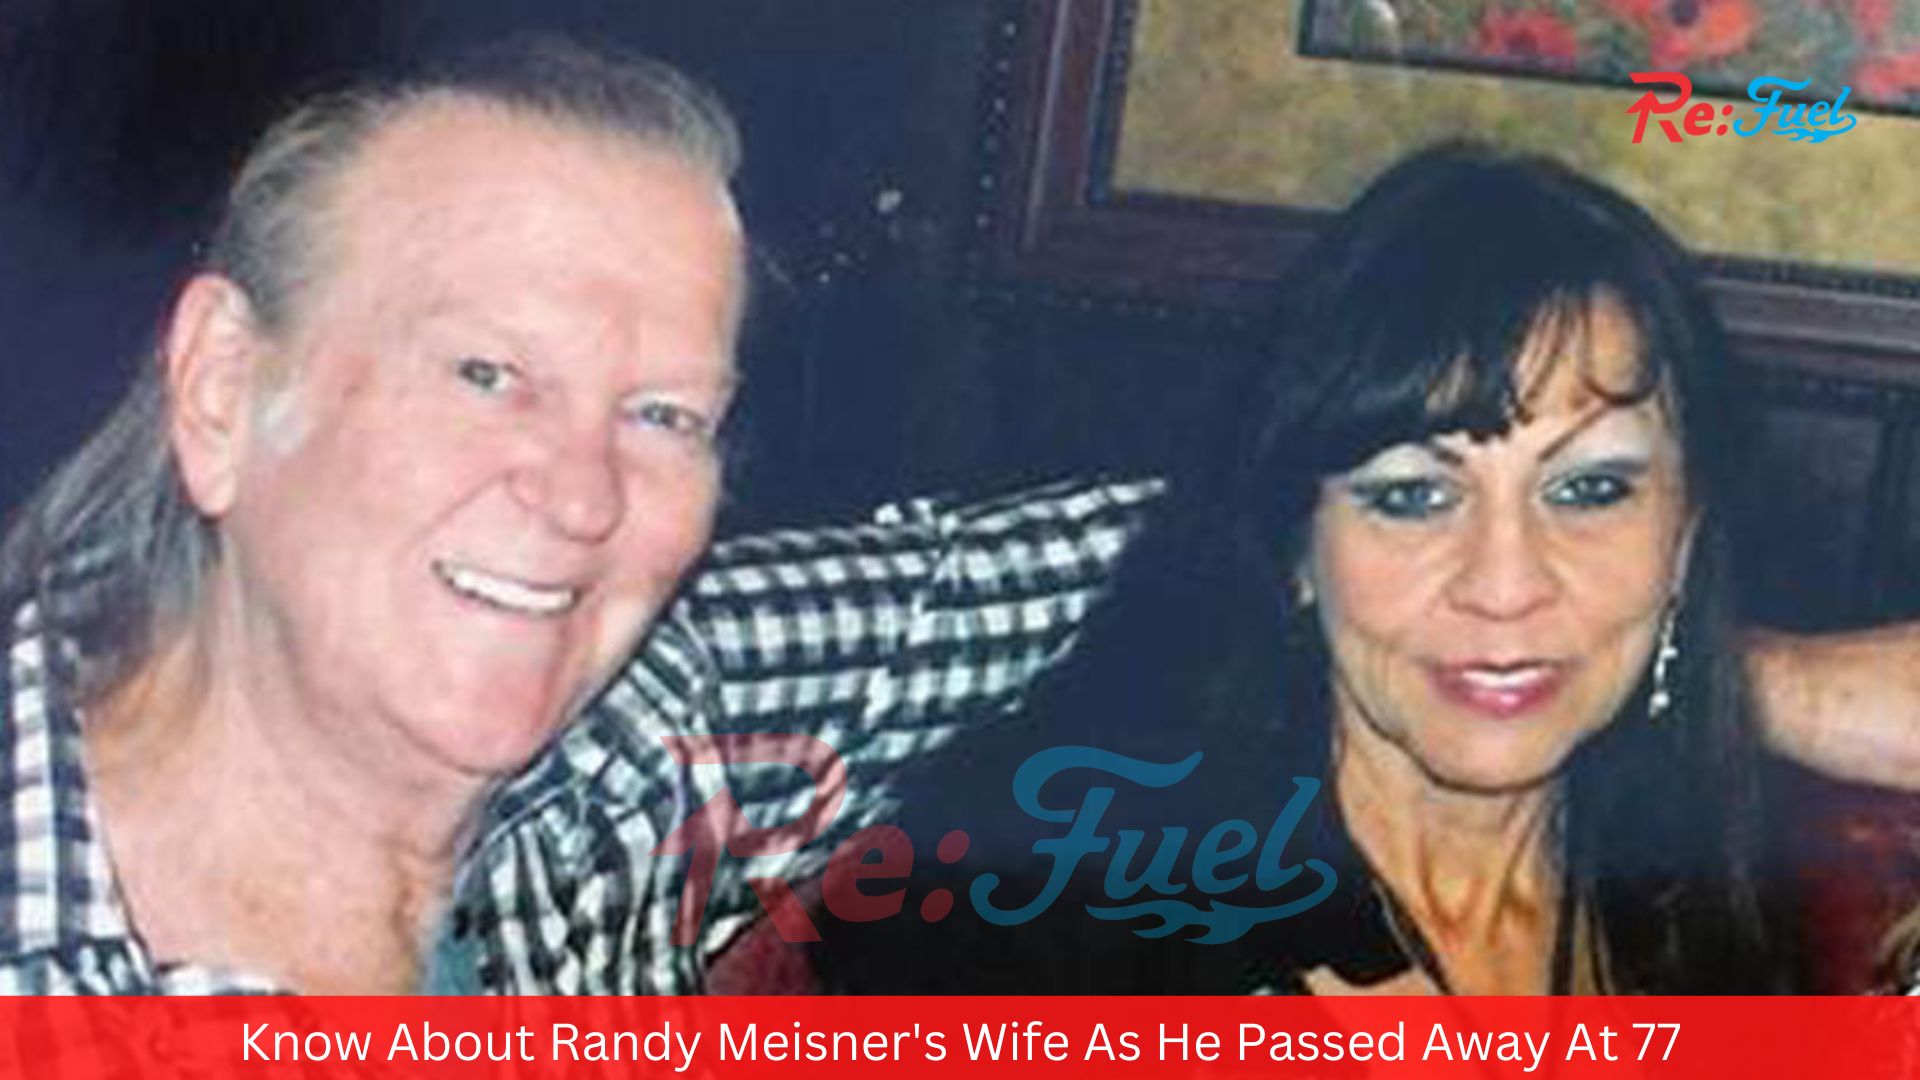 Know About Randy Meisner's Wife As He Passed Away At 77